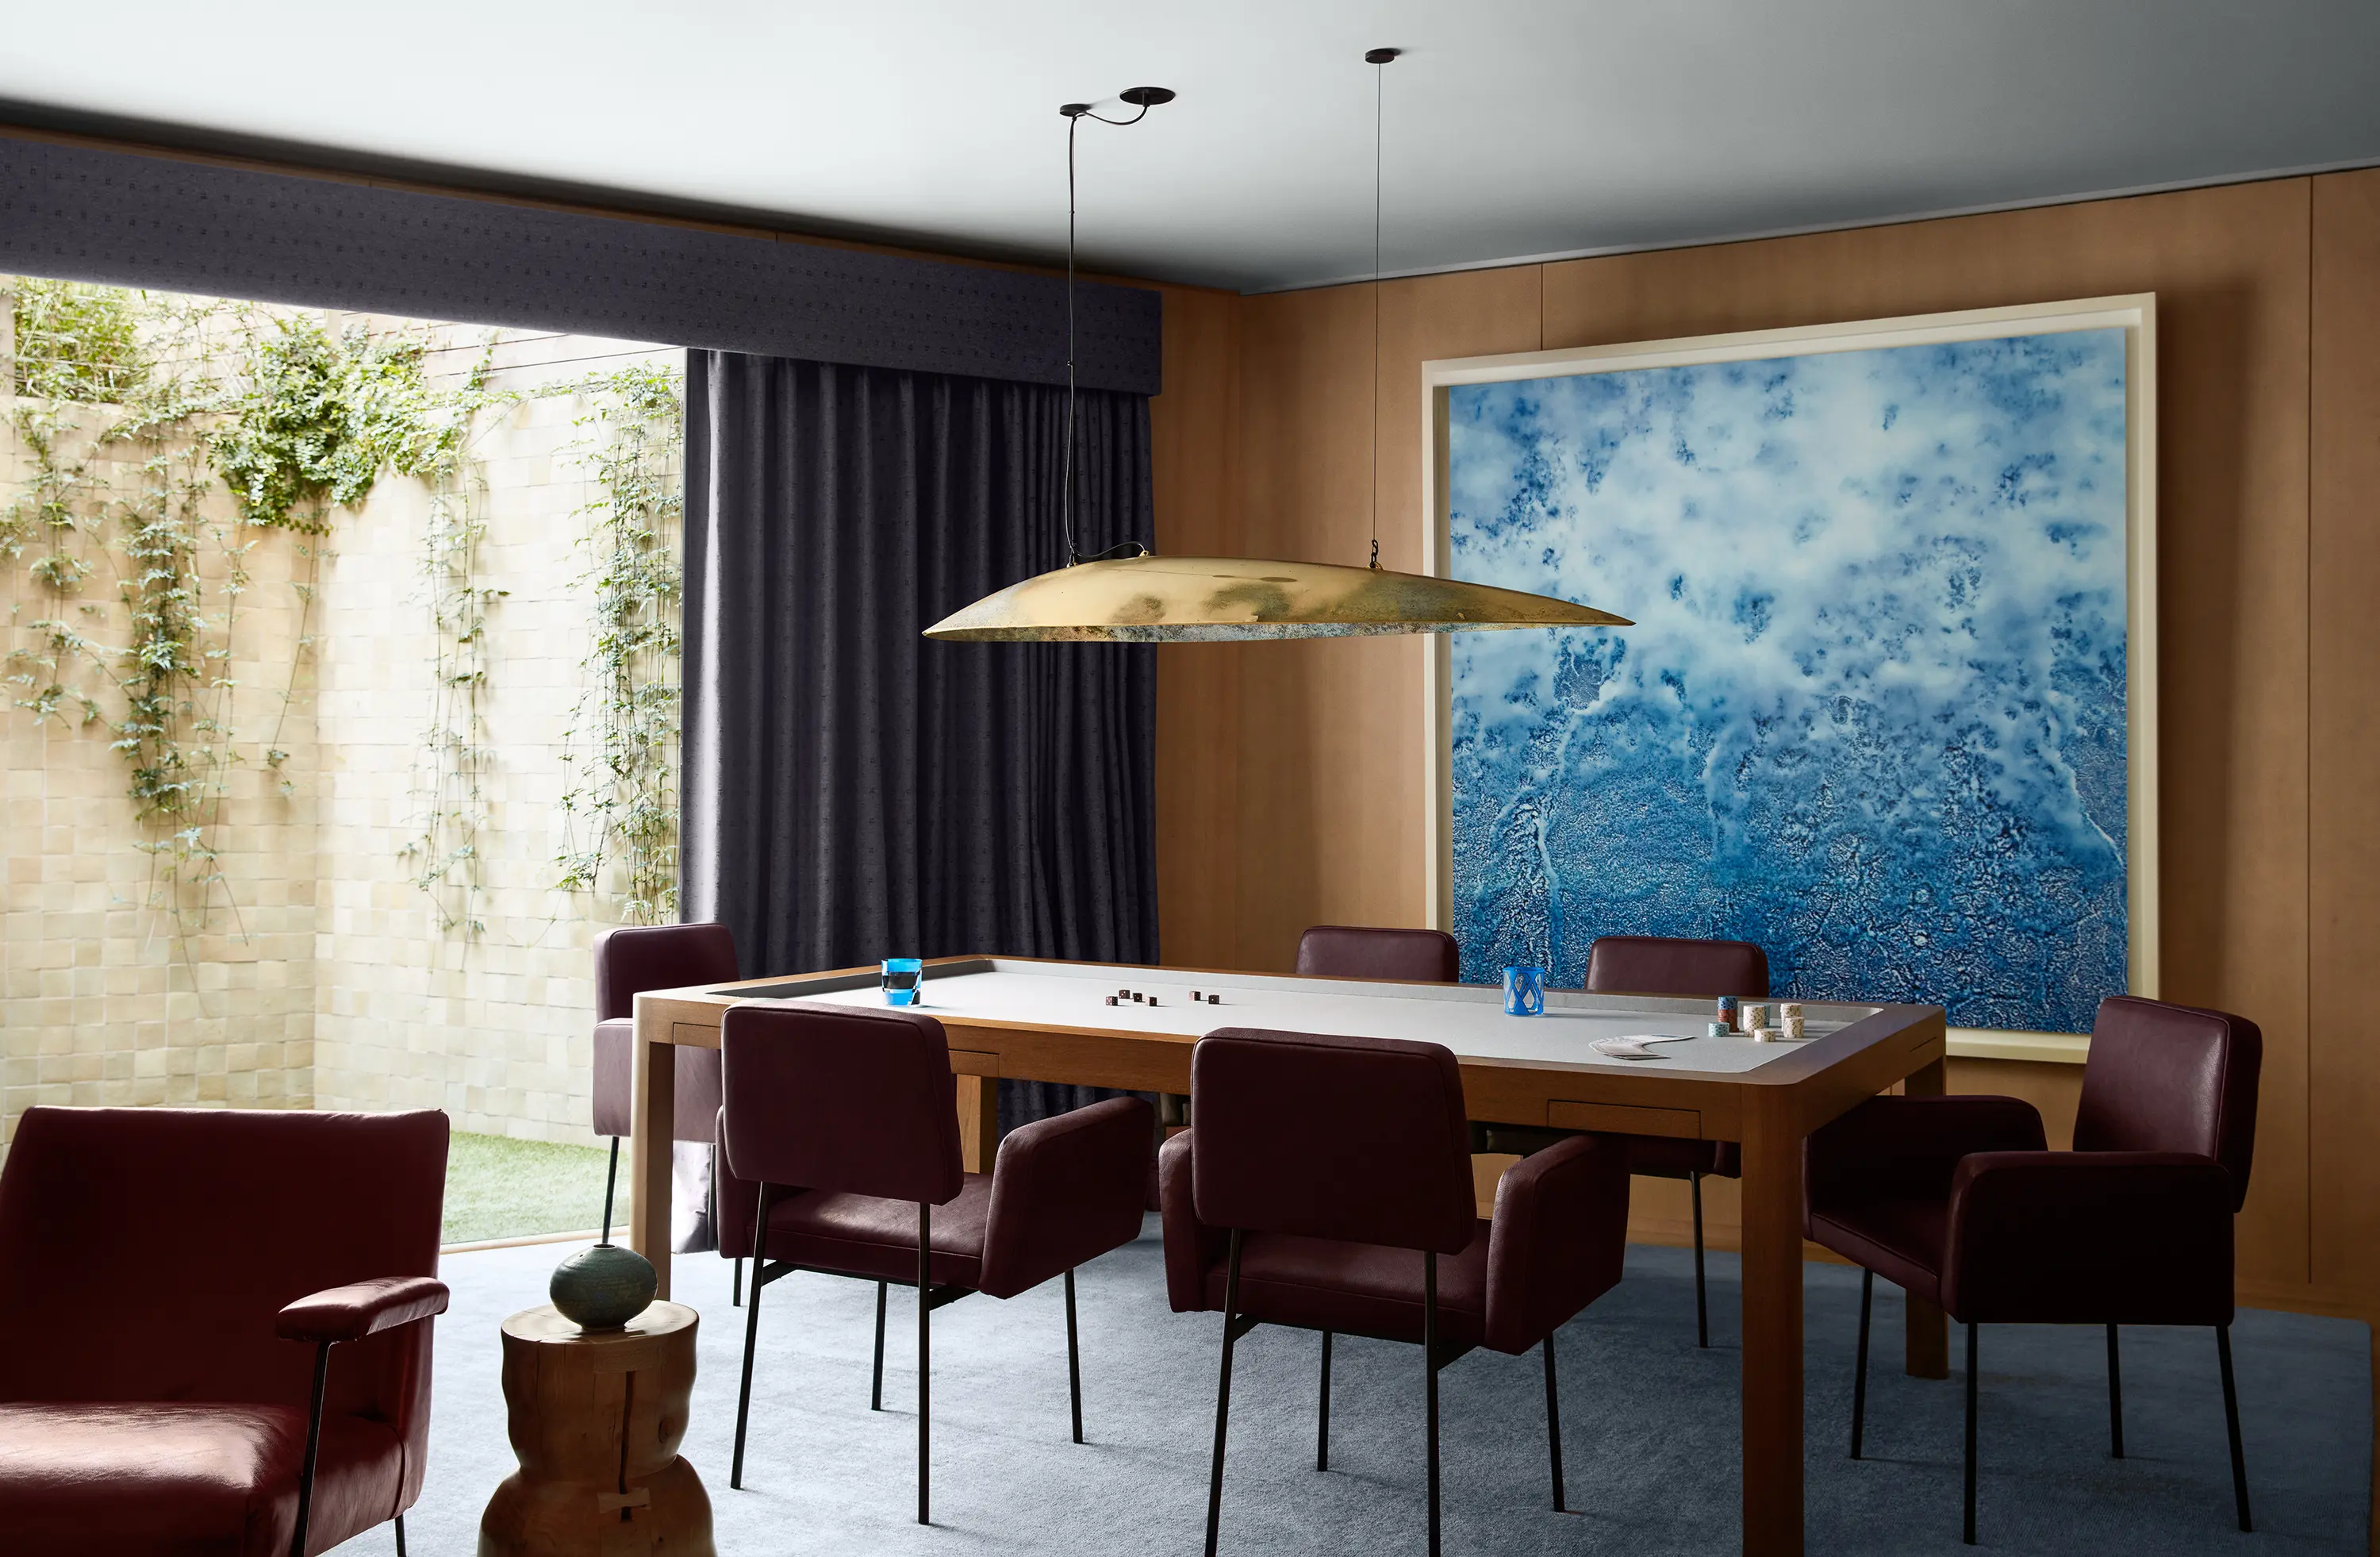 In the sportive relief of a unique Adam Fuss photogram, Dieter Vander Velpen and DIM Atelier’s Shark Light sets off a custom Chroma game table and vintage dining chairs by Nathan Lindberg in Howe leather with a view to the garden.